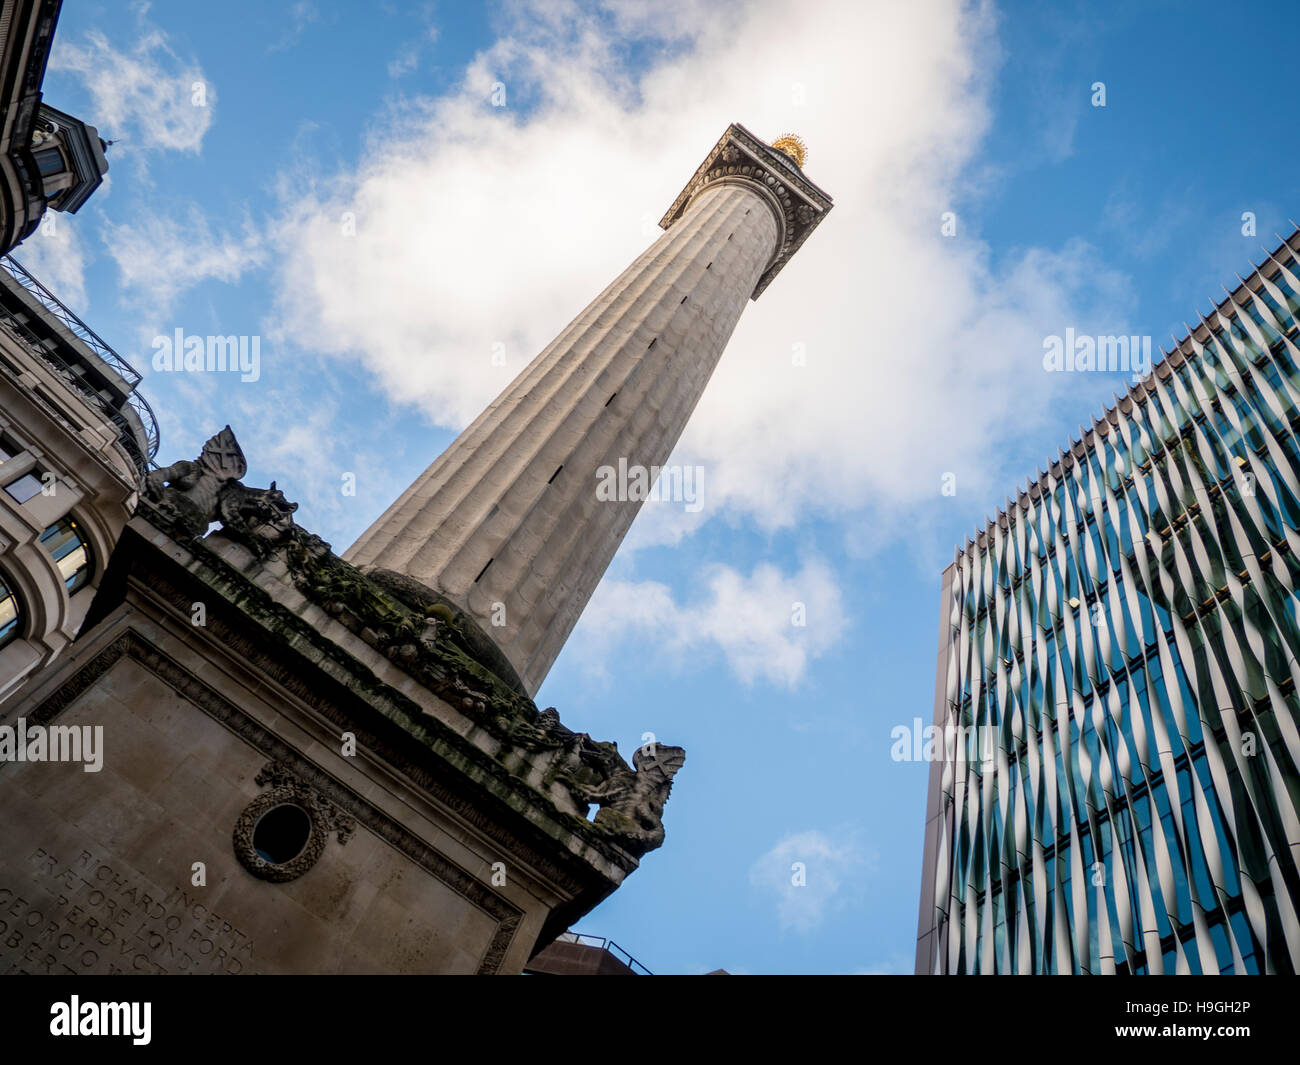 Monument to the Great fire of London by Sir Christopher Wren, London, UK. Stock Photo